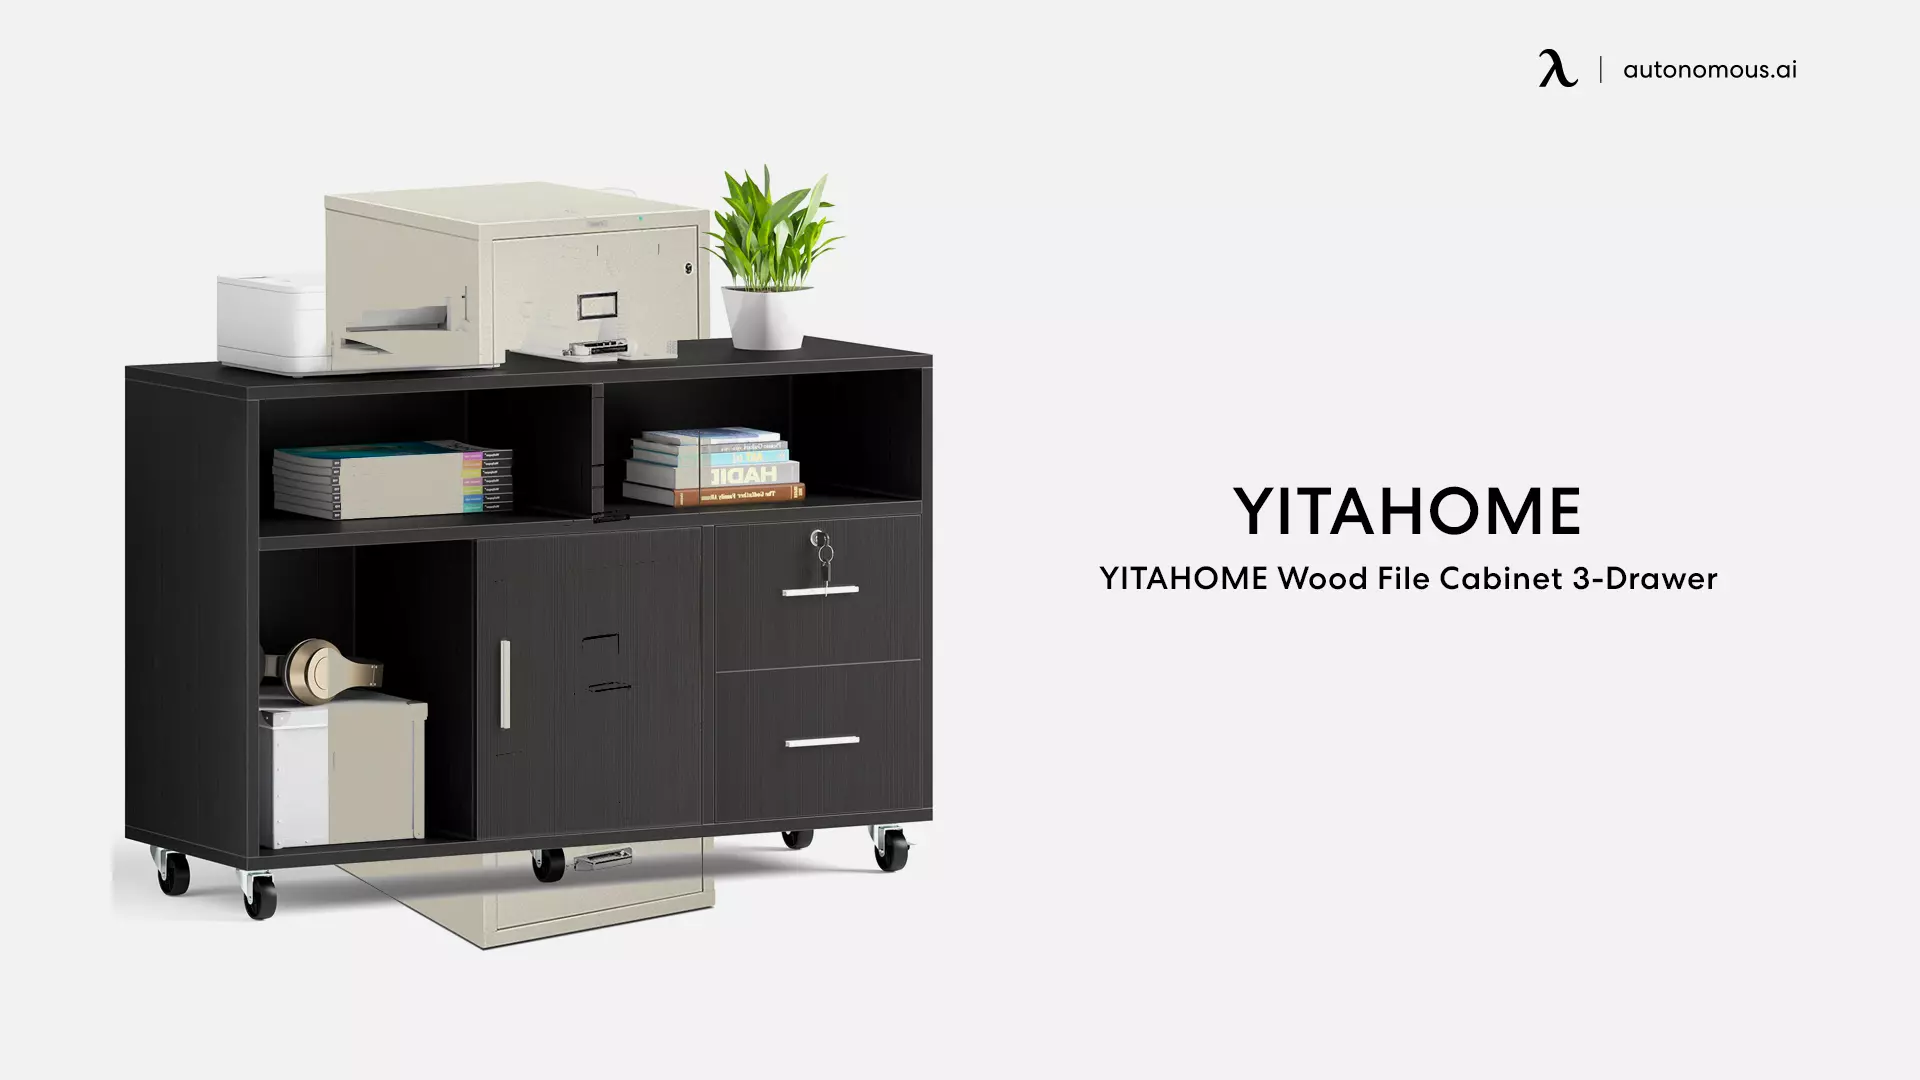 YITAHOME Wood File Cabinet 3-Drawer